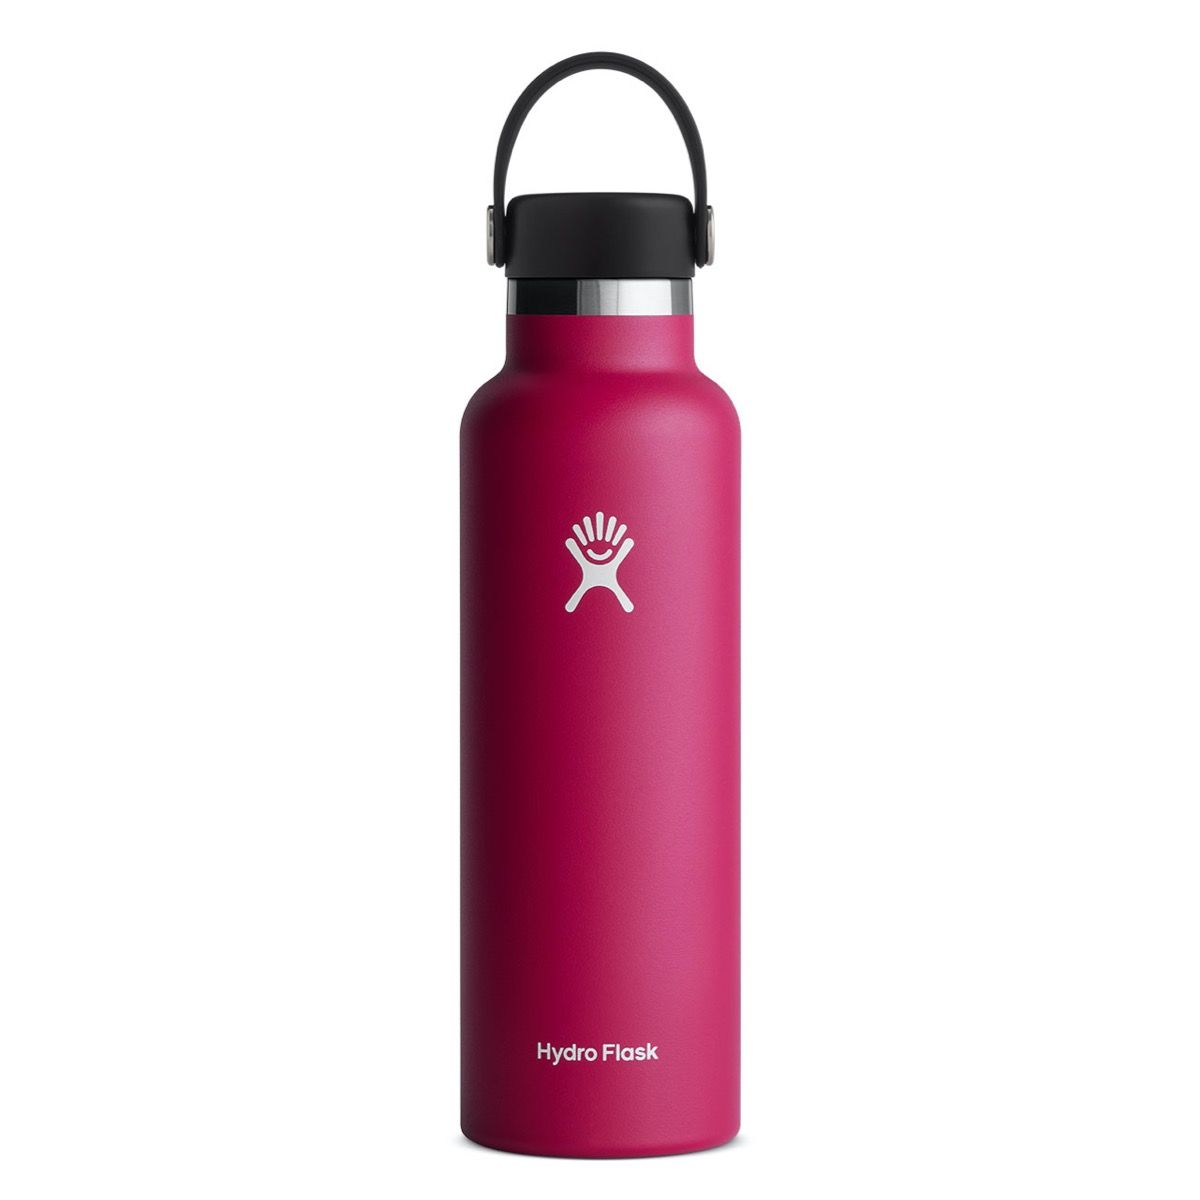 Hydro Flask - 21oz. Vacuum Insulated Stainless Steel Water Bottle Spring 2022 Colors all things being eco chilliwack  snapper